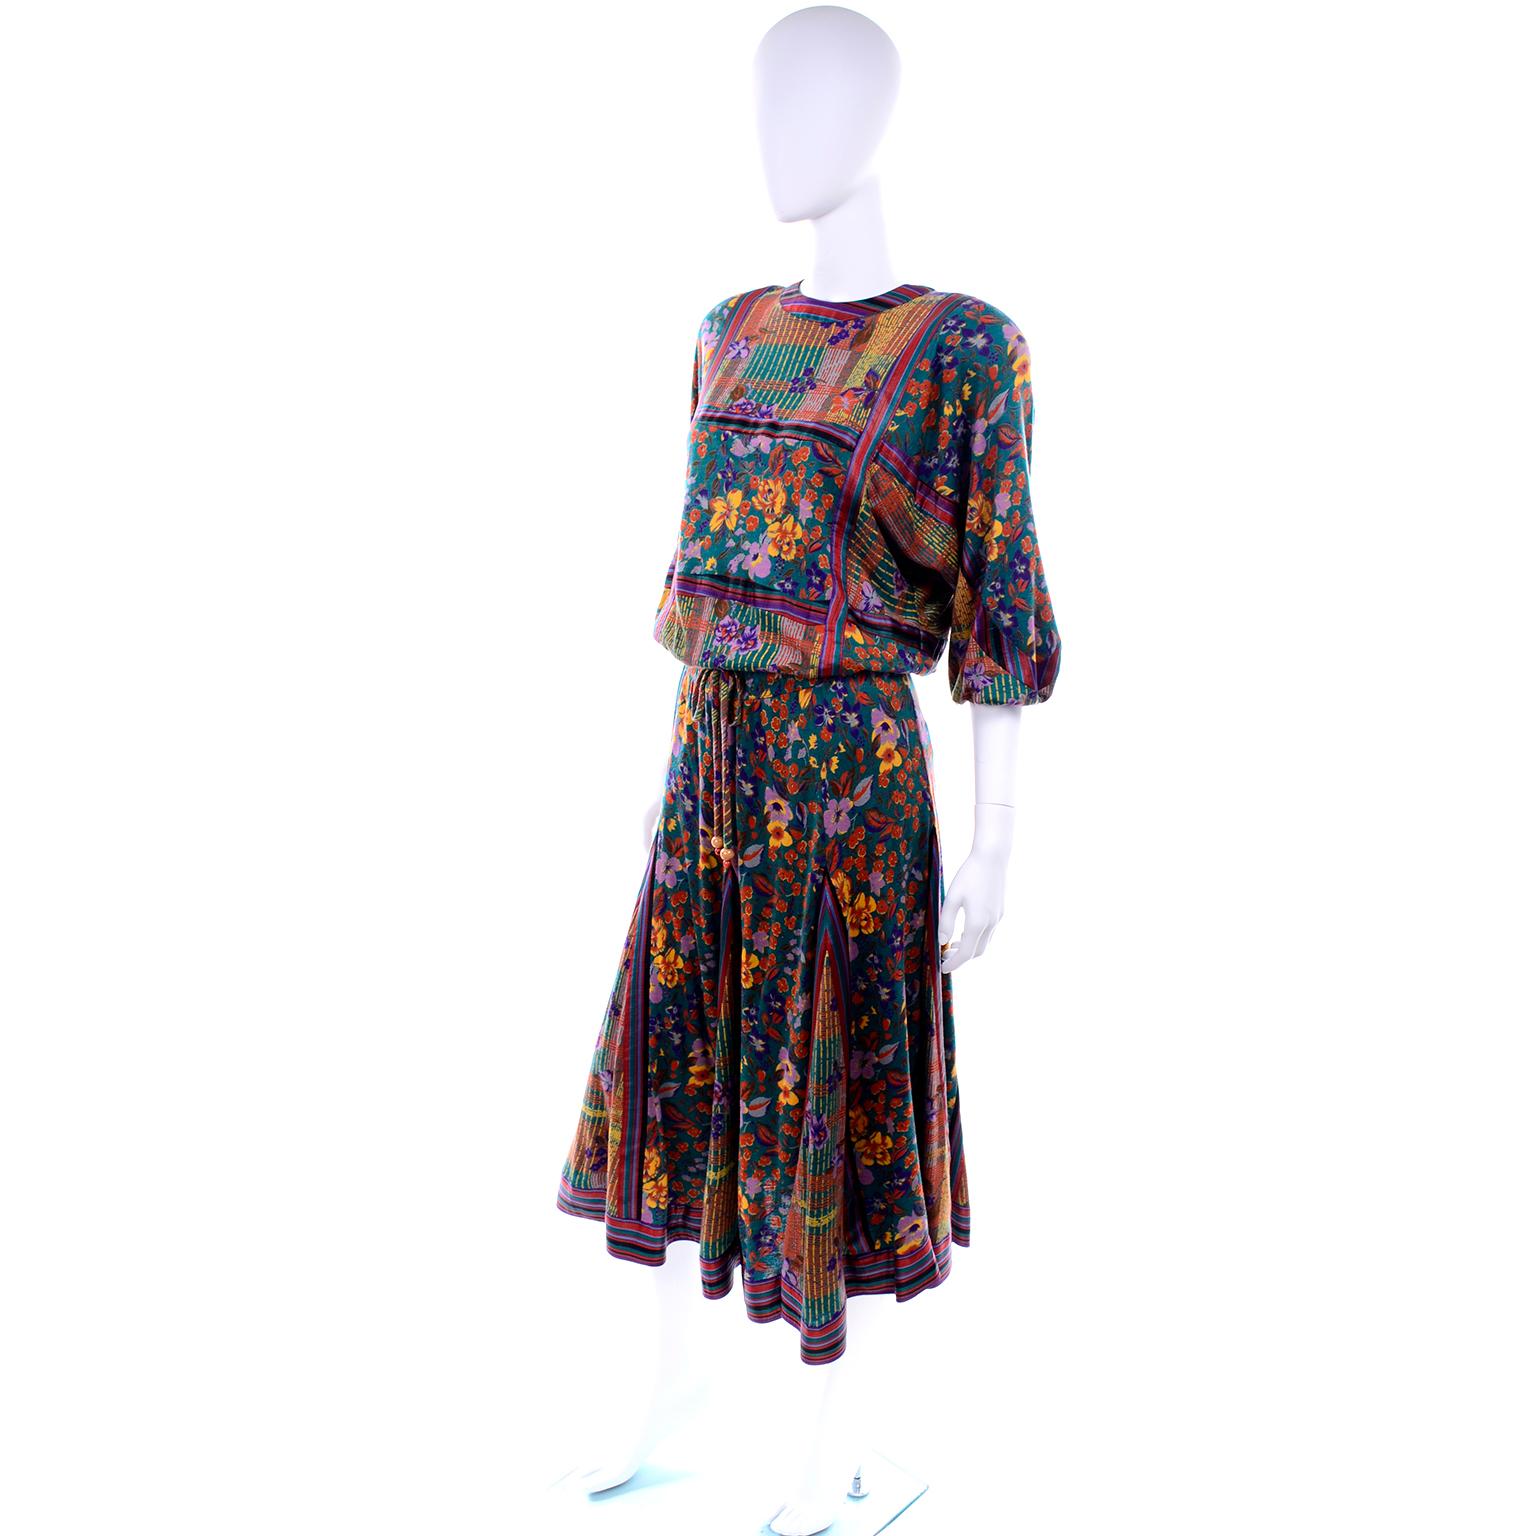 We have re-discovered our love affair with Diane Freis pieces and this one is one of our favorites! This Diane Freis Original two piece dress includes a gored skirt and a drawstring top in a wool/acrylic blend. The print is a pattern mix of florals